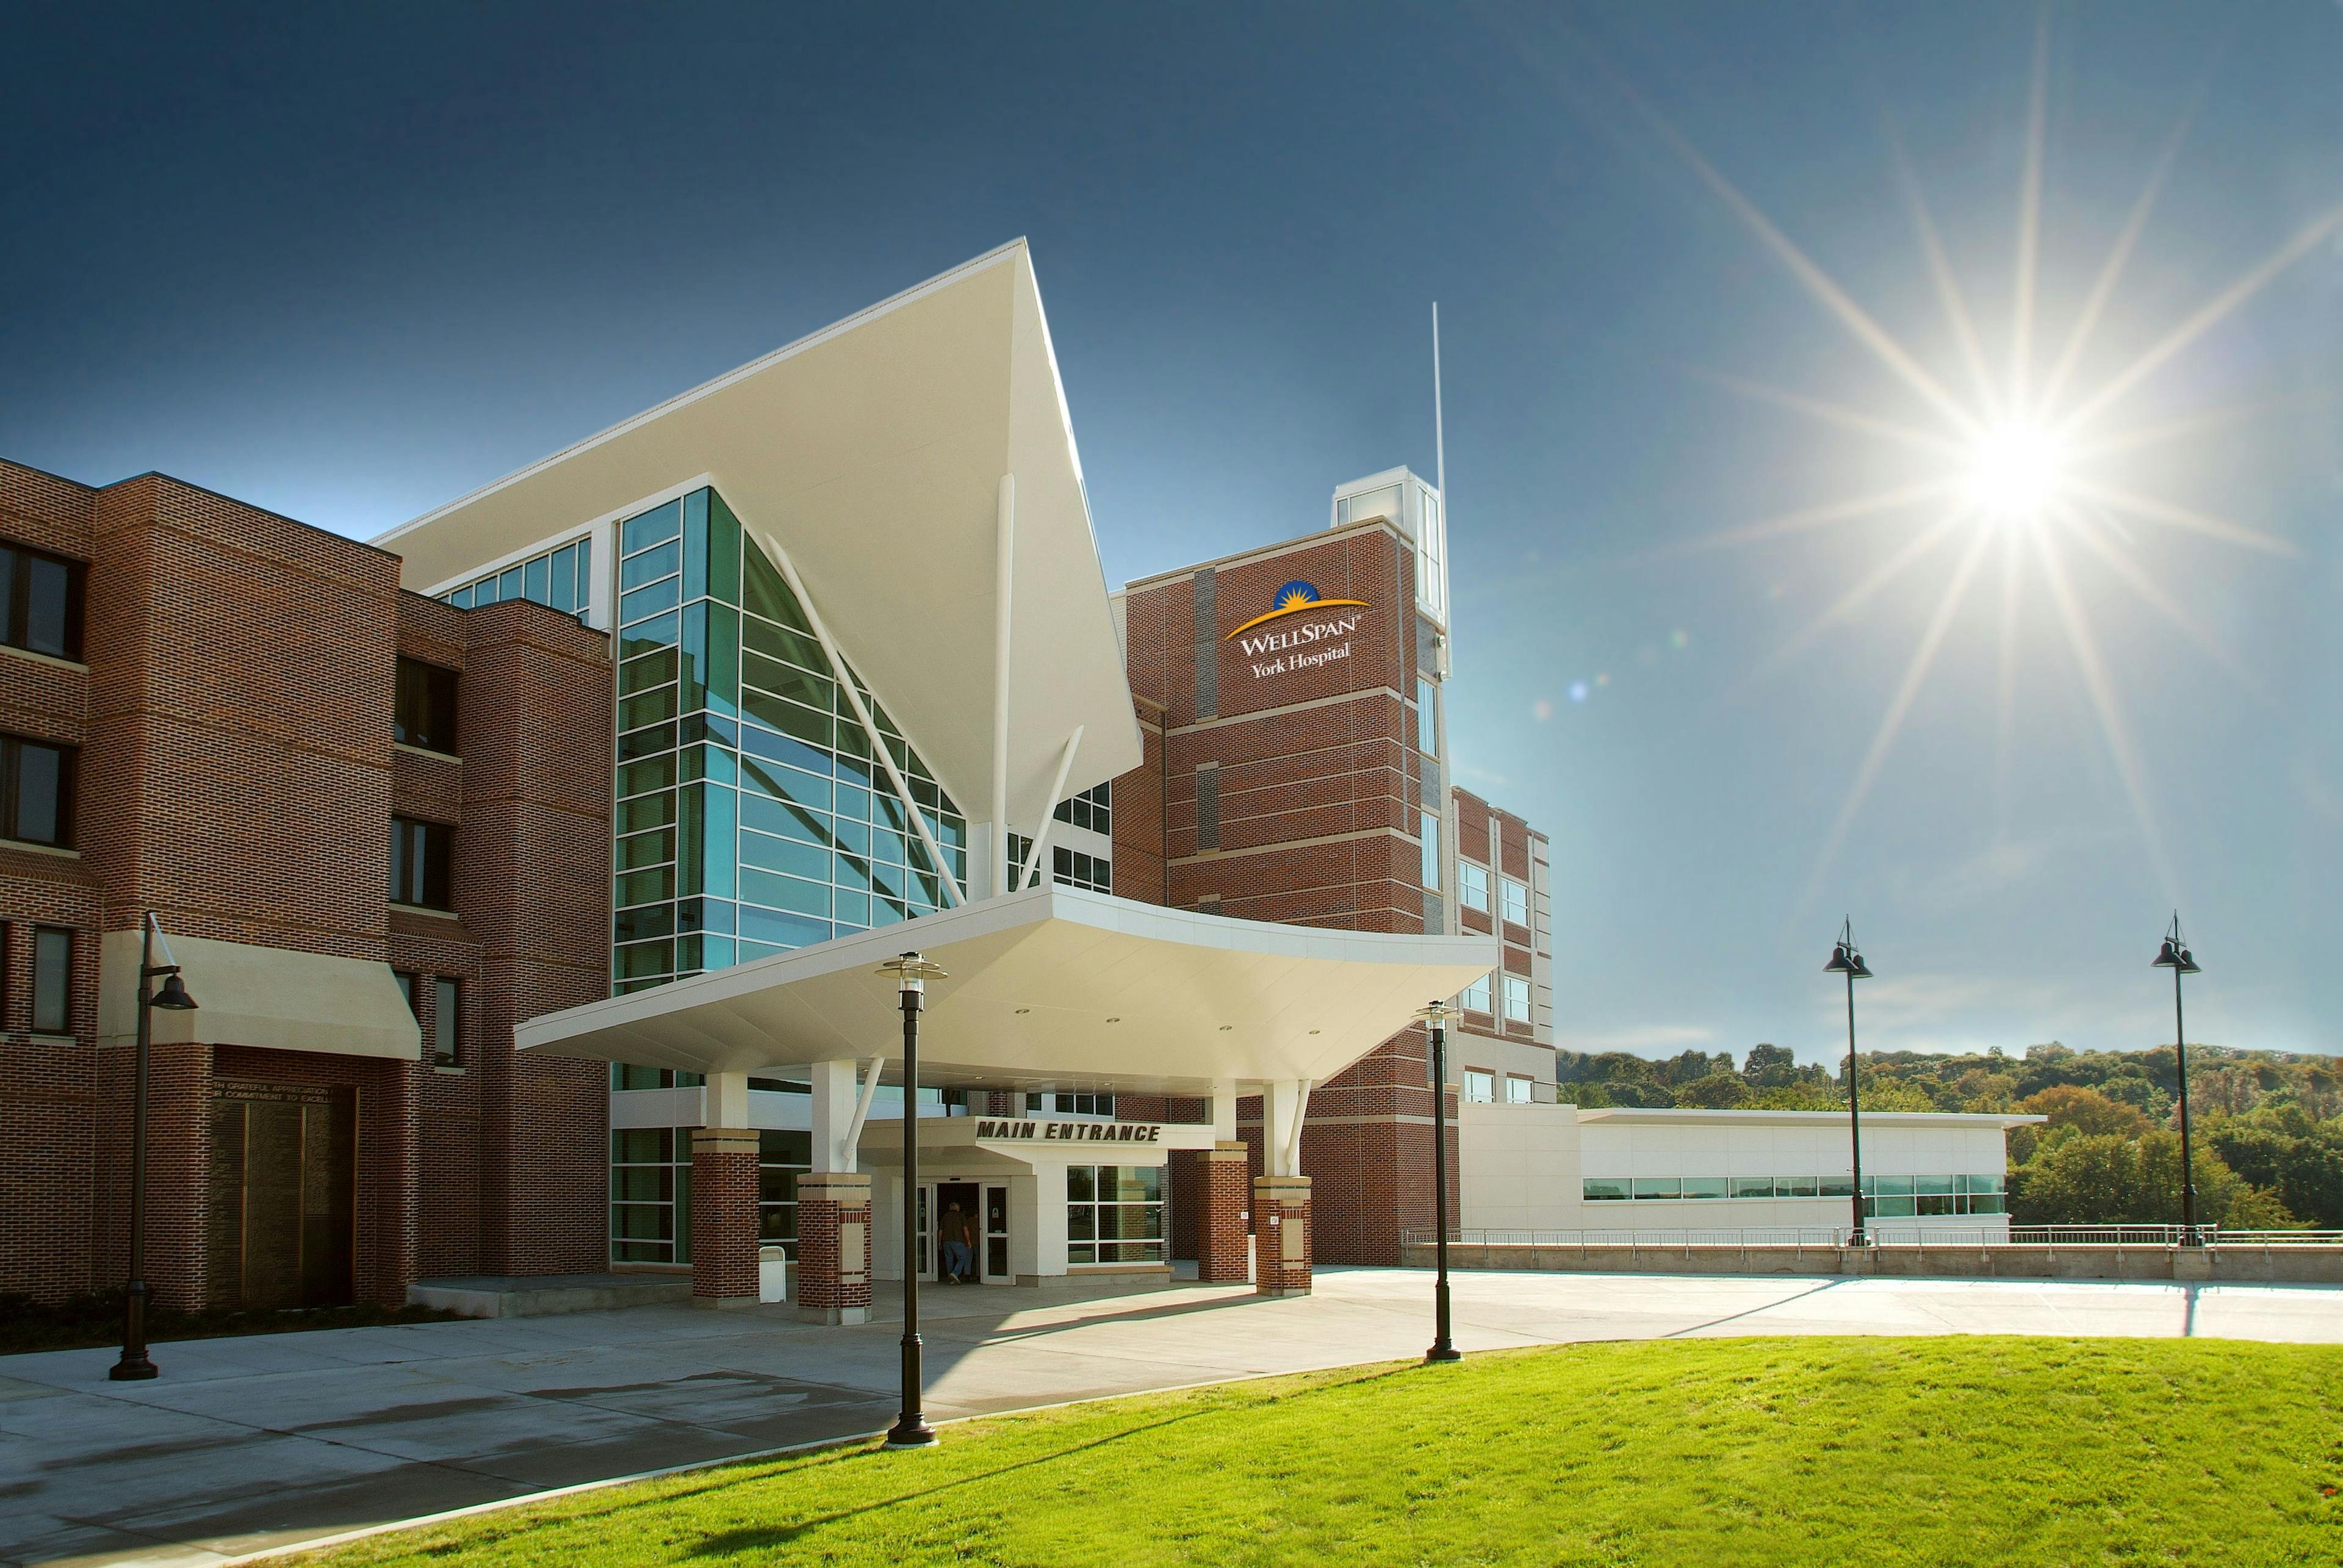 WellSpan Health operates several hospitals in central Pennsylvania, including its flagship facility, WellSpan York Hospital. (Photo provided by WellSpan Health).